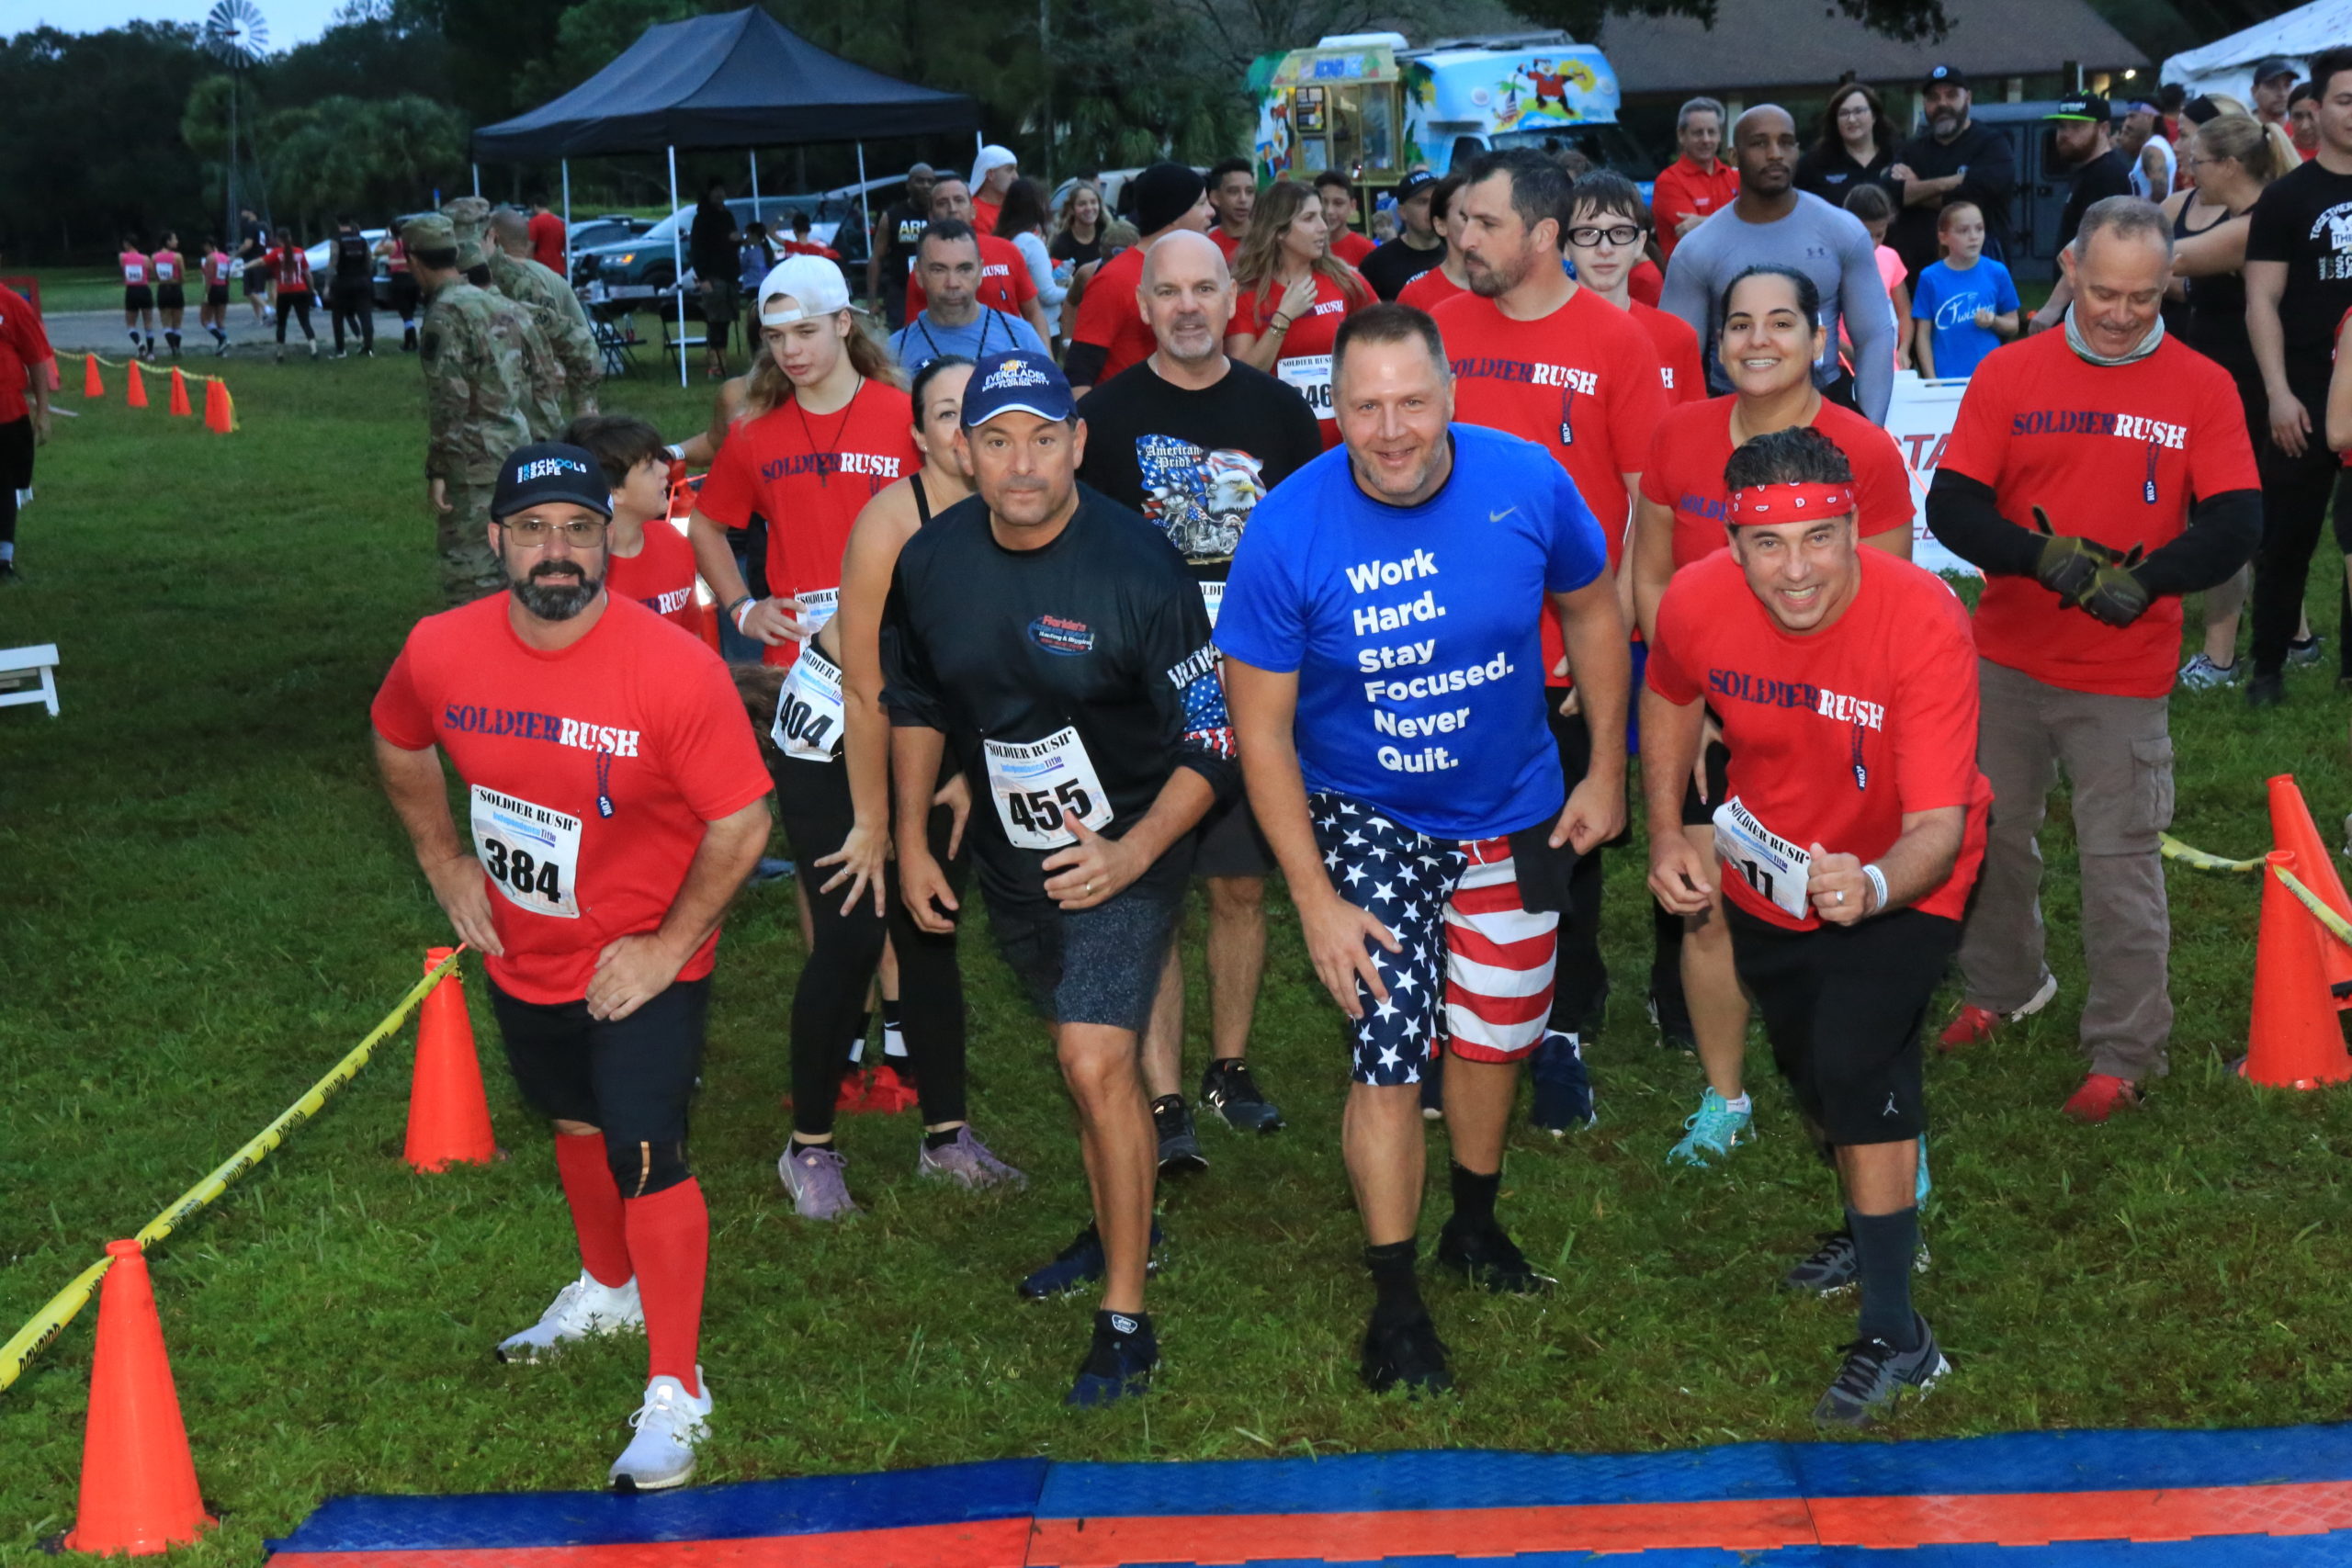 7th Annual Soldier Rush